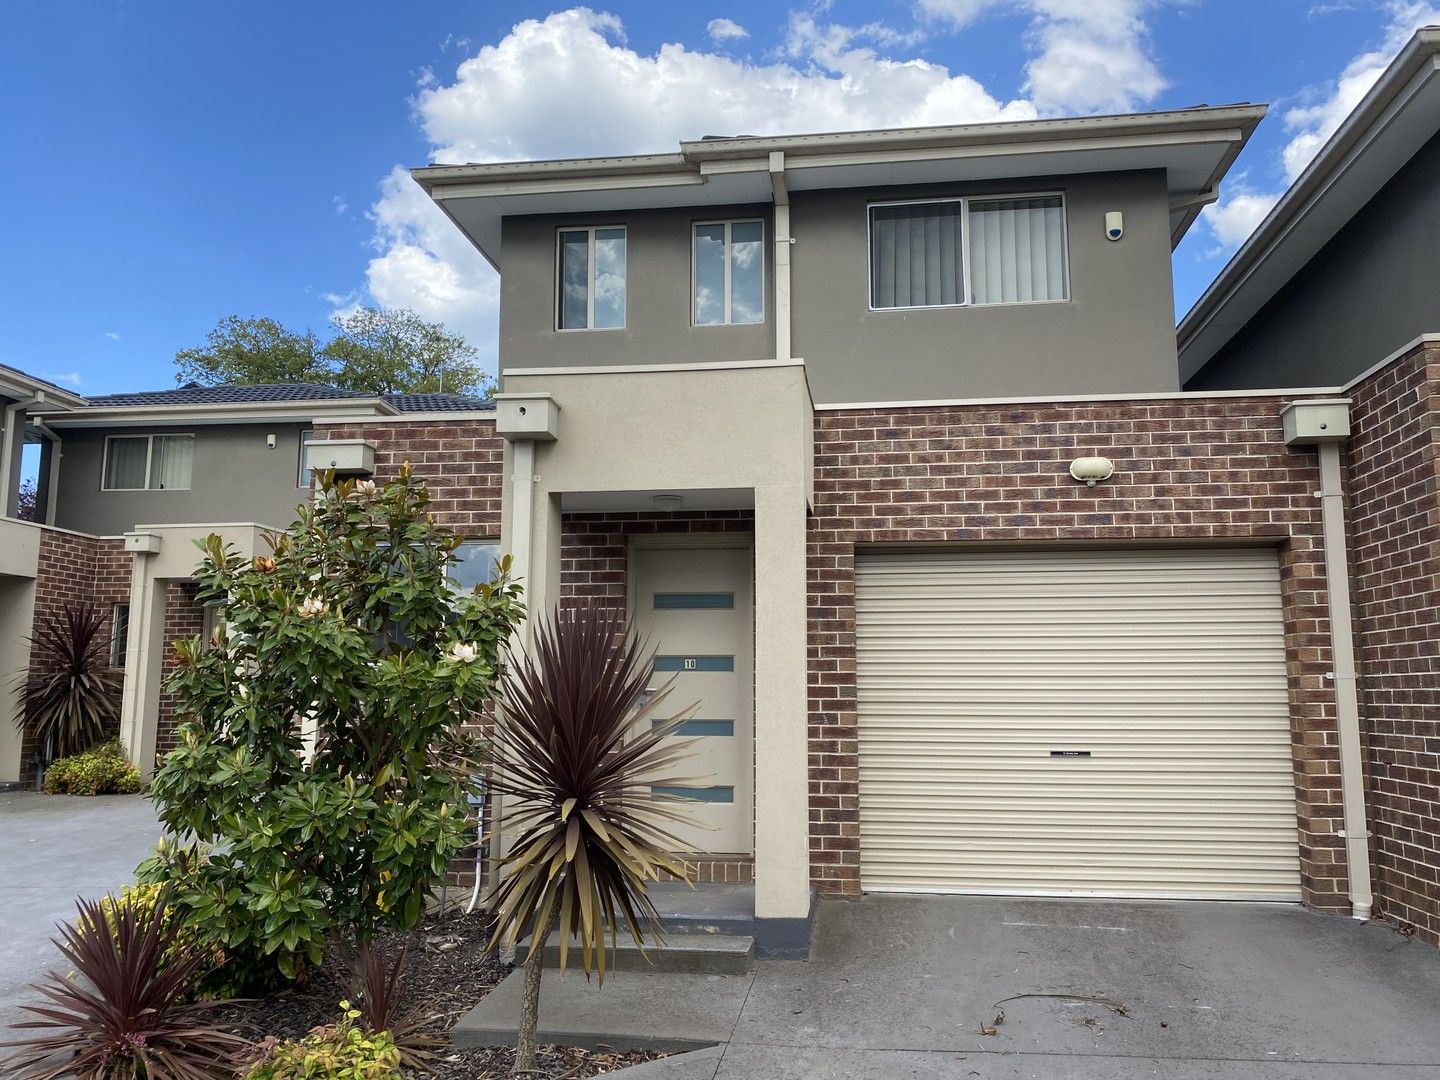 2 bedrooms Townhouse in 10/14 Browning Street KILSYTH VIC, 3137